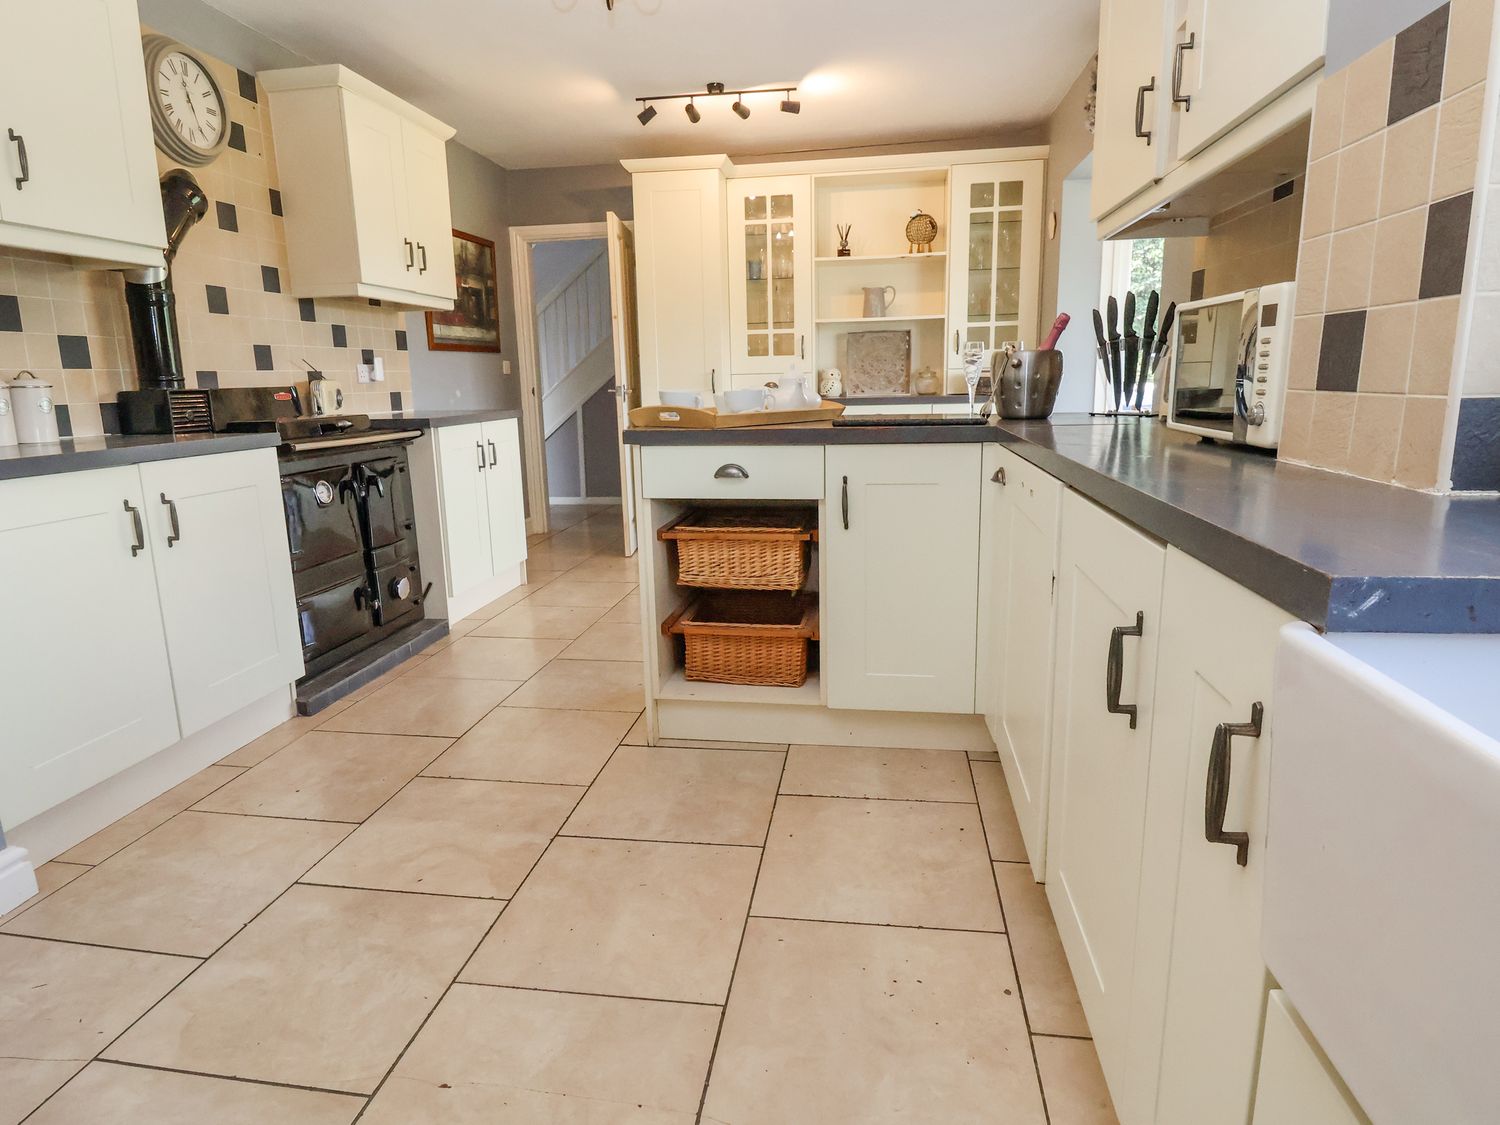 Shire Cottage is near Hanwood, in Shropshire. Four-bedroom home, with rural views and hot tub. Pets.